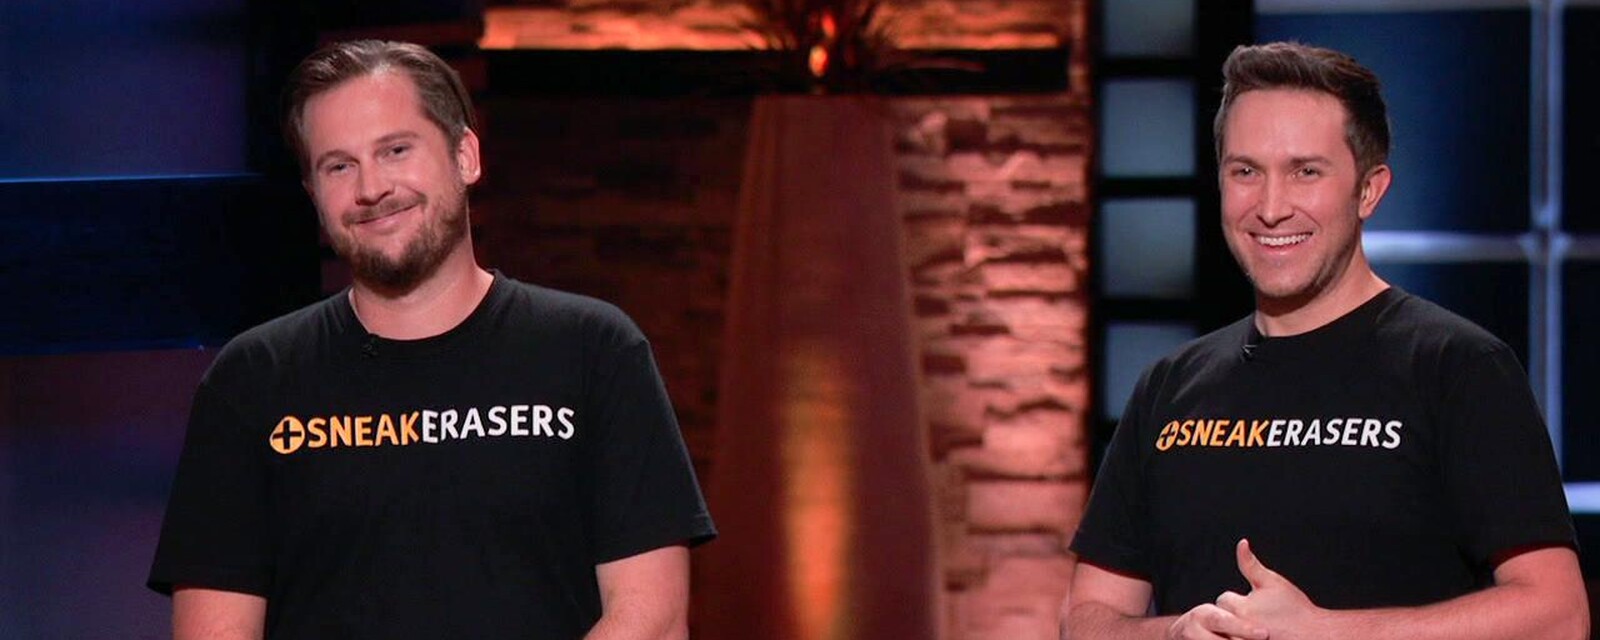 The Businesses and Products from Season 12, Episode 2 of Shark Tank